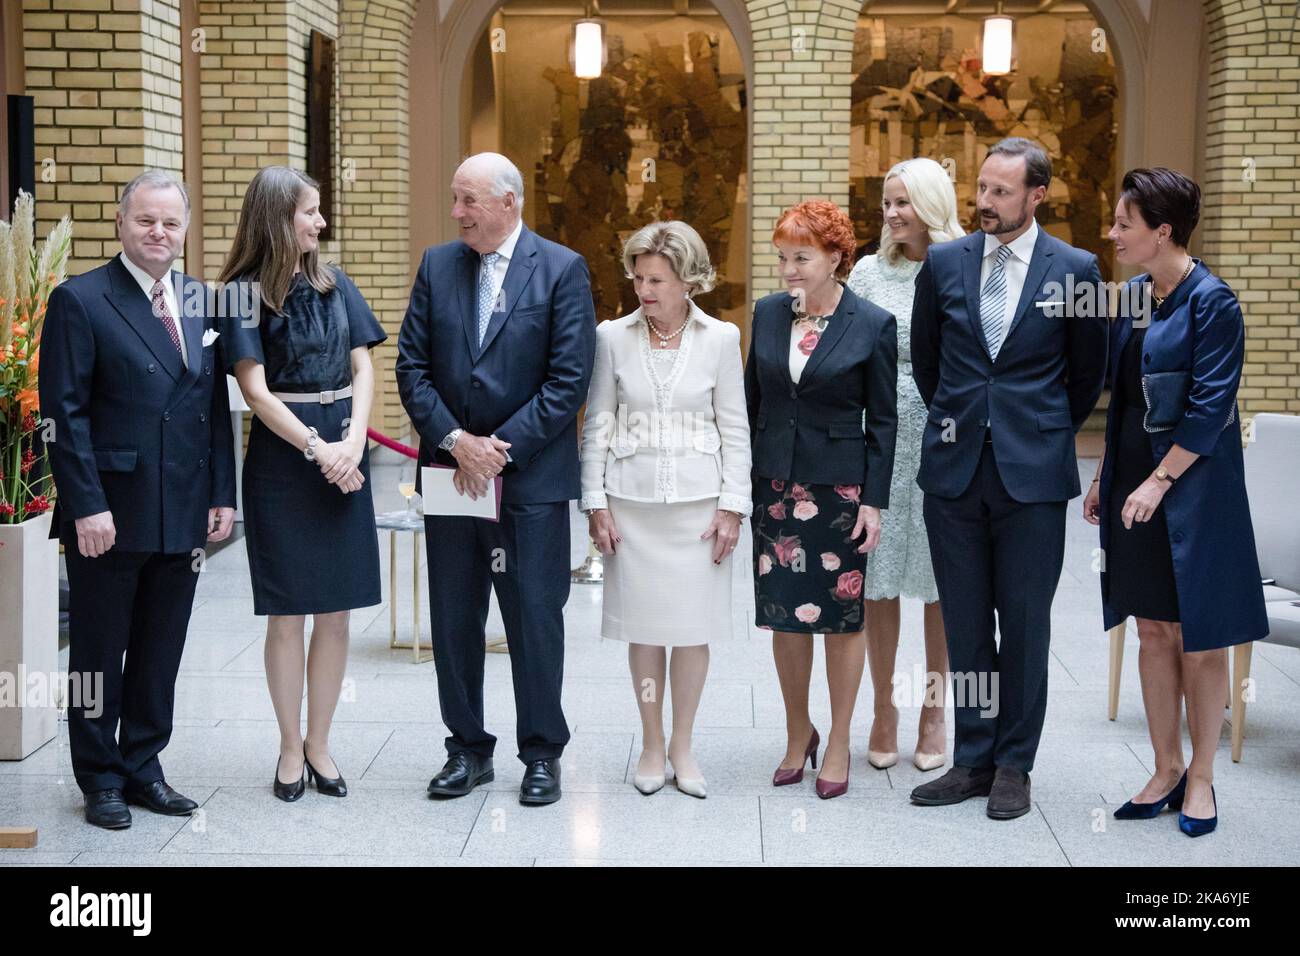 Oslo, Norway 20170918. From left: President of the Storting Olemic Thommessen, painter Kira Wager, King Harald, Queen Sonja, Marit Nybakk, Crown Princess Mette-Marit, Crown Prince Haakon and Jury Chairman during the unveiling of King and Queen's 80th anniversary gift from the Storting (Parliament) on Monday. The gift is a painting by Kira Wager called 'King Olav V's Oath for the Storting'. Photo: Audun Braastad / NTB scanpi Stock Photo